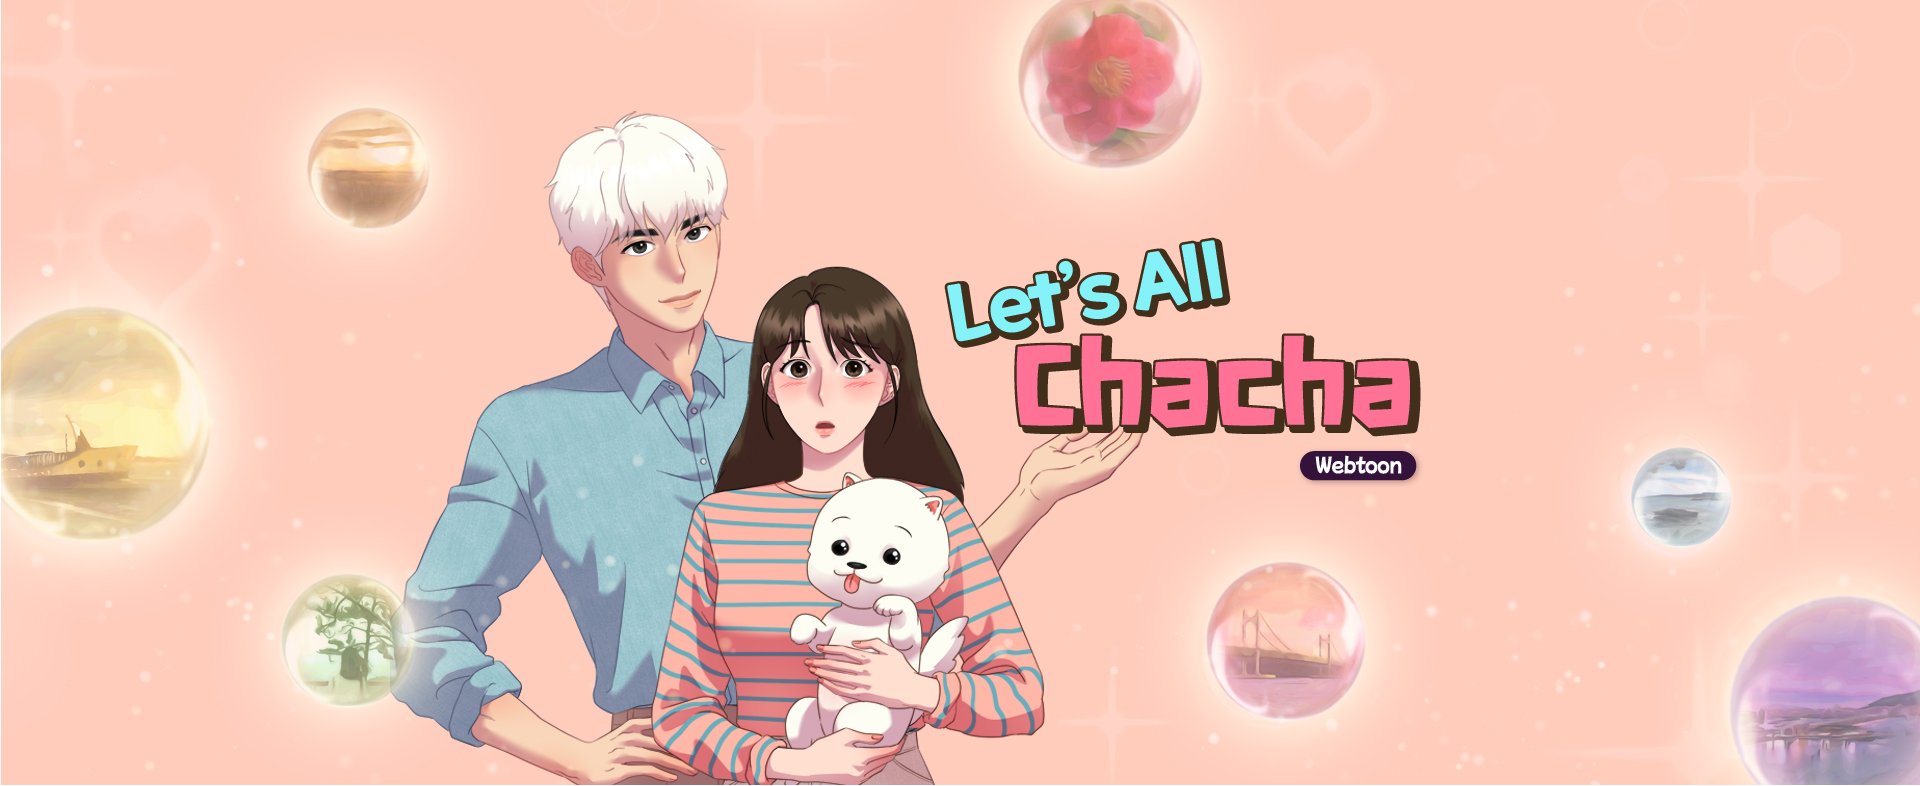 Webtoon about traveling with pets 'Let’s All Chacha' 